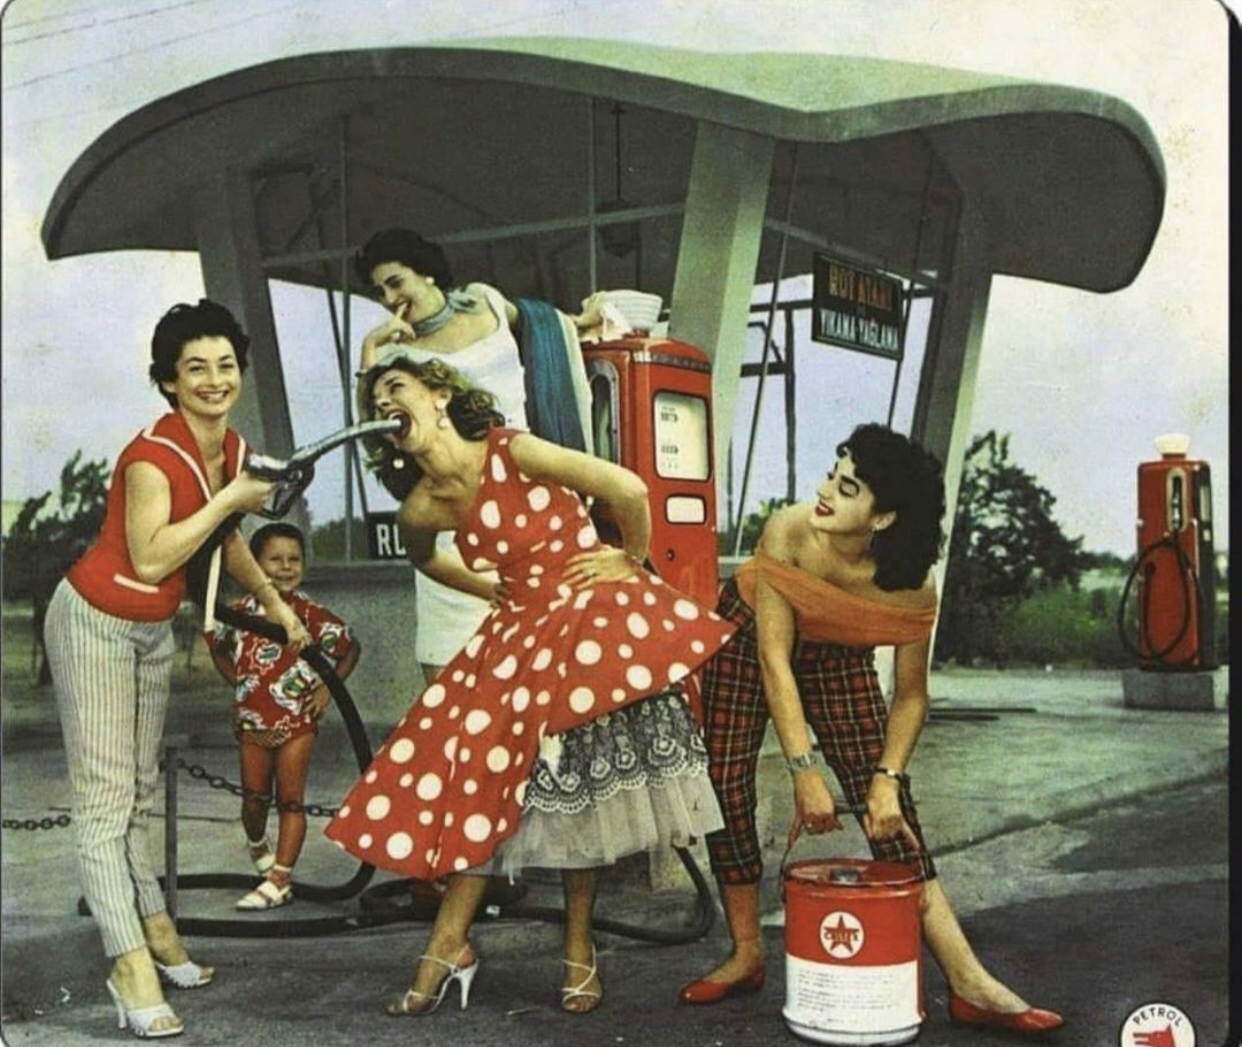 History - Images of vintage gas stations ~ pre 65